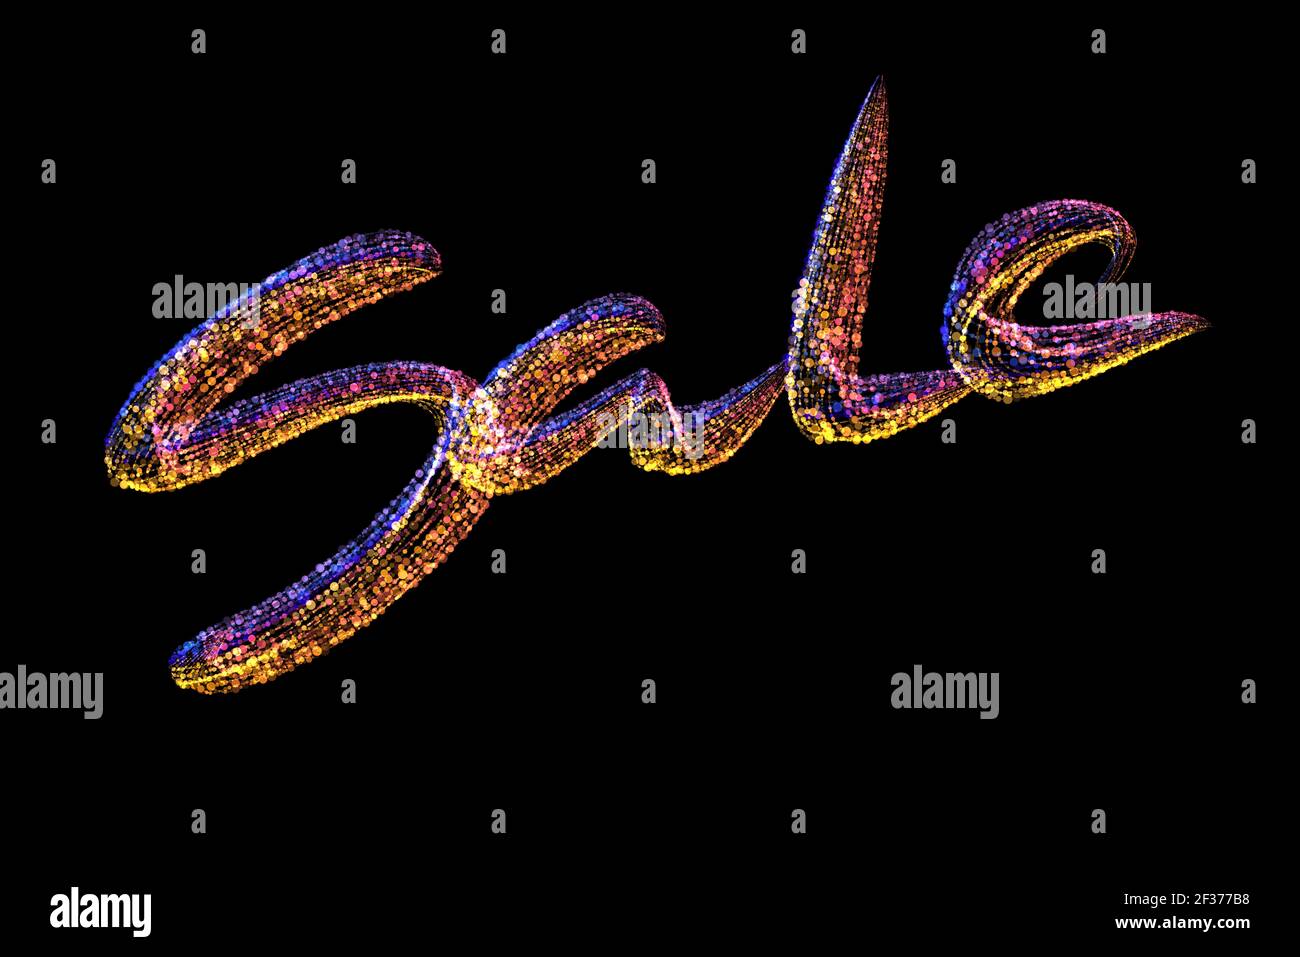 Sale handmade lettering, calligraphy made by colorful confetti, for prints, posters, web Stock Photo